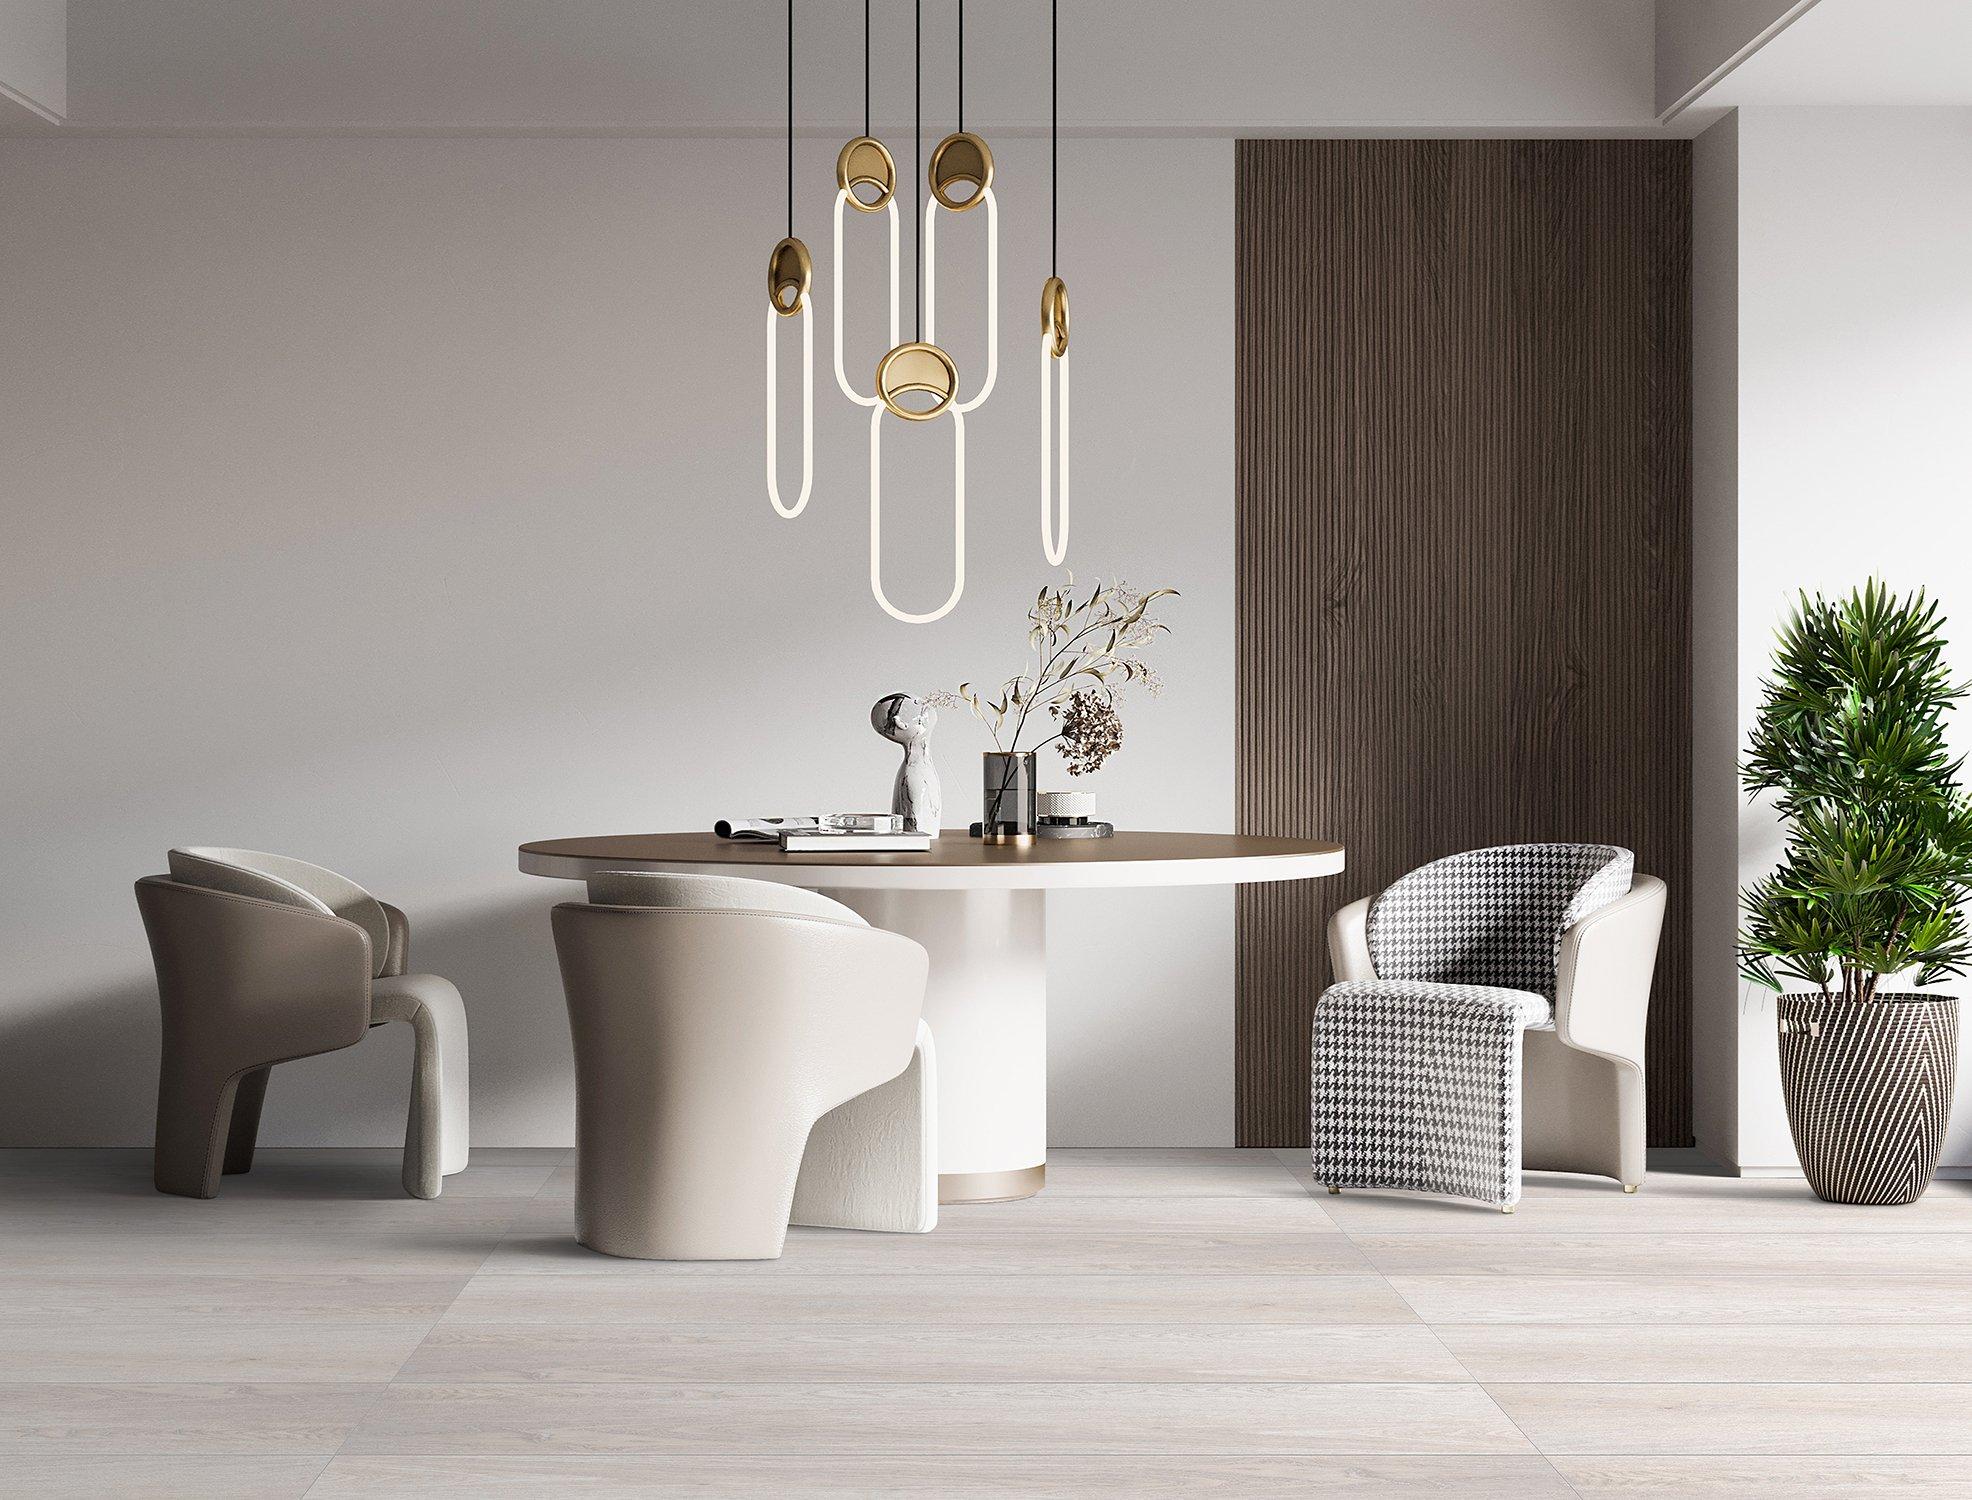 Ithica White Wood Plank Porcelain Tile